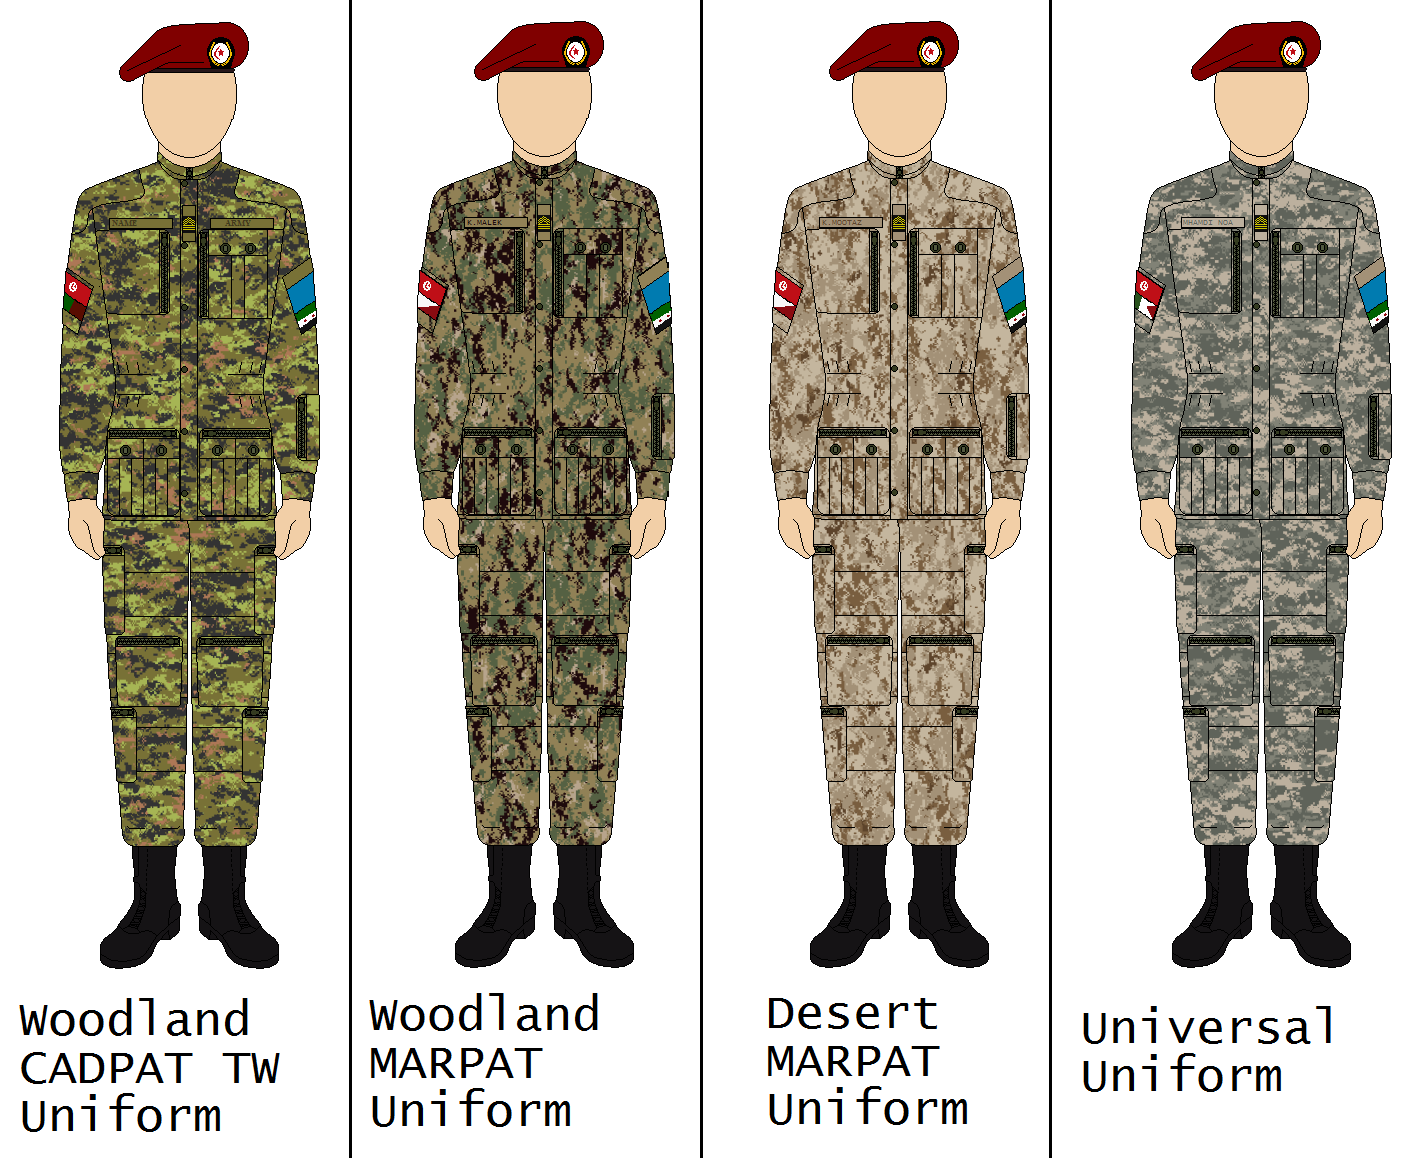 tunisia_arab_unity_peace_corps_all_uniforms_by_mootaz10-d5iza60.png